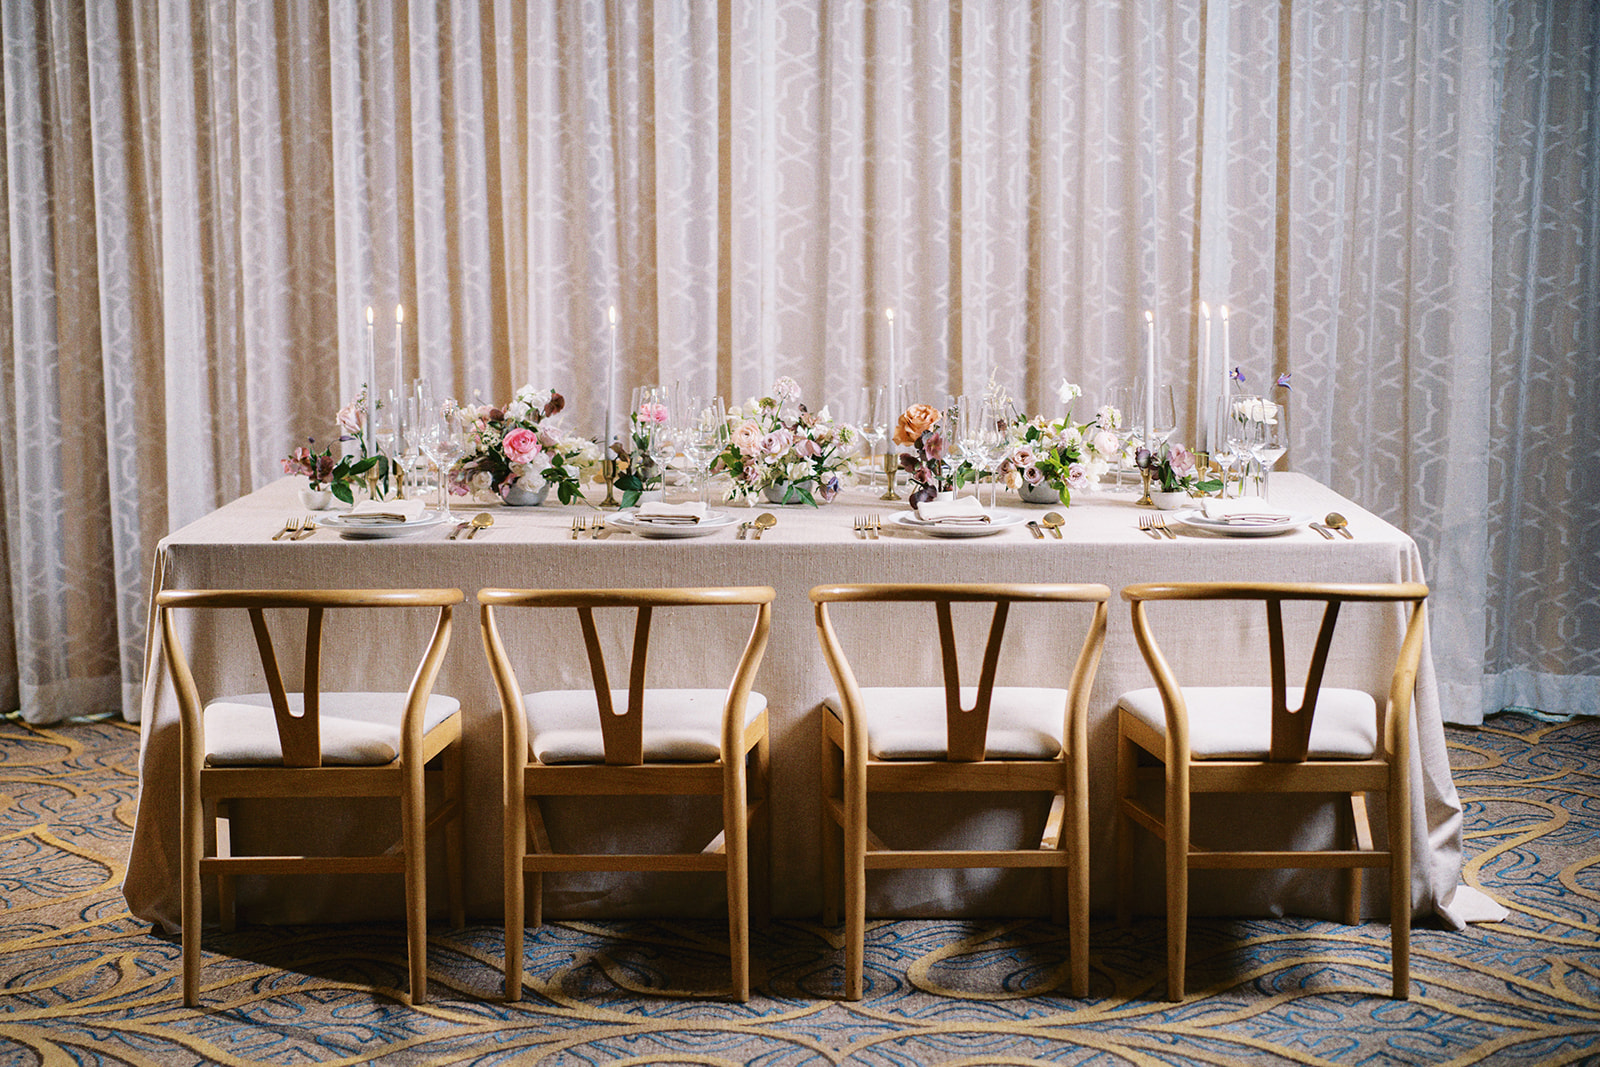 A stunning tablescape designed by Flower Bar Co. in Amelia Island at the Omni Resort.